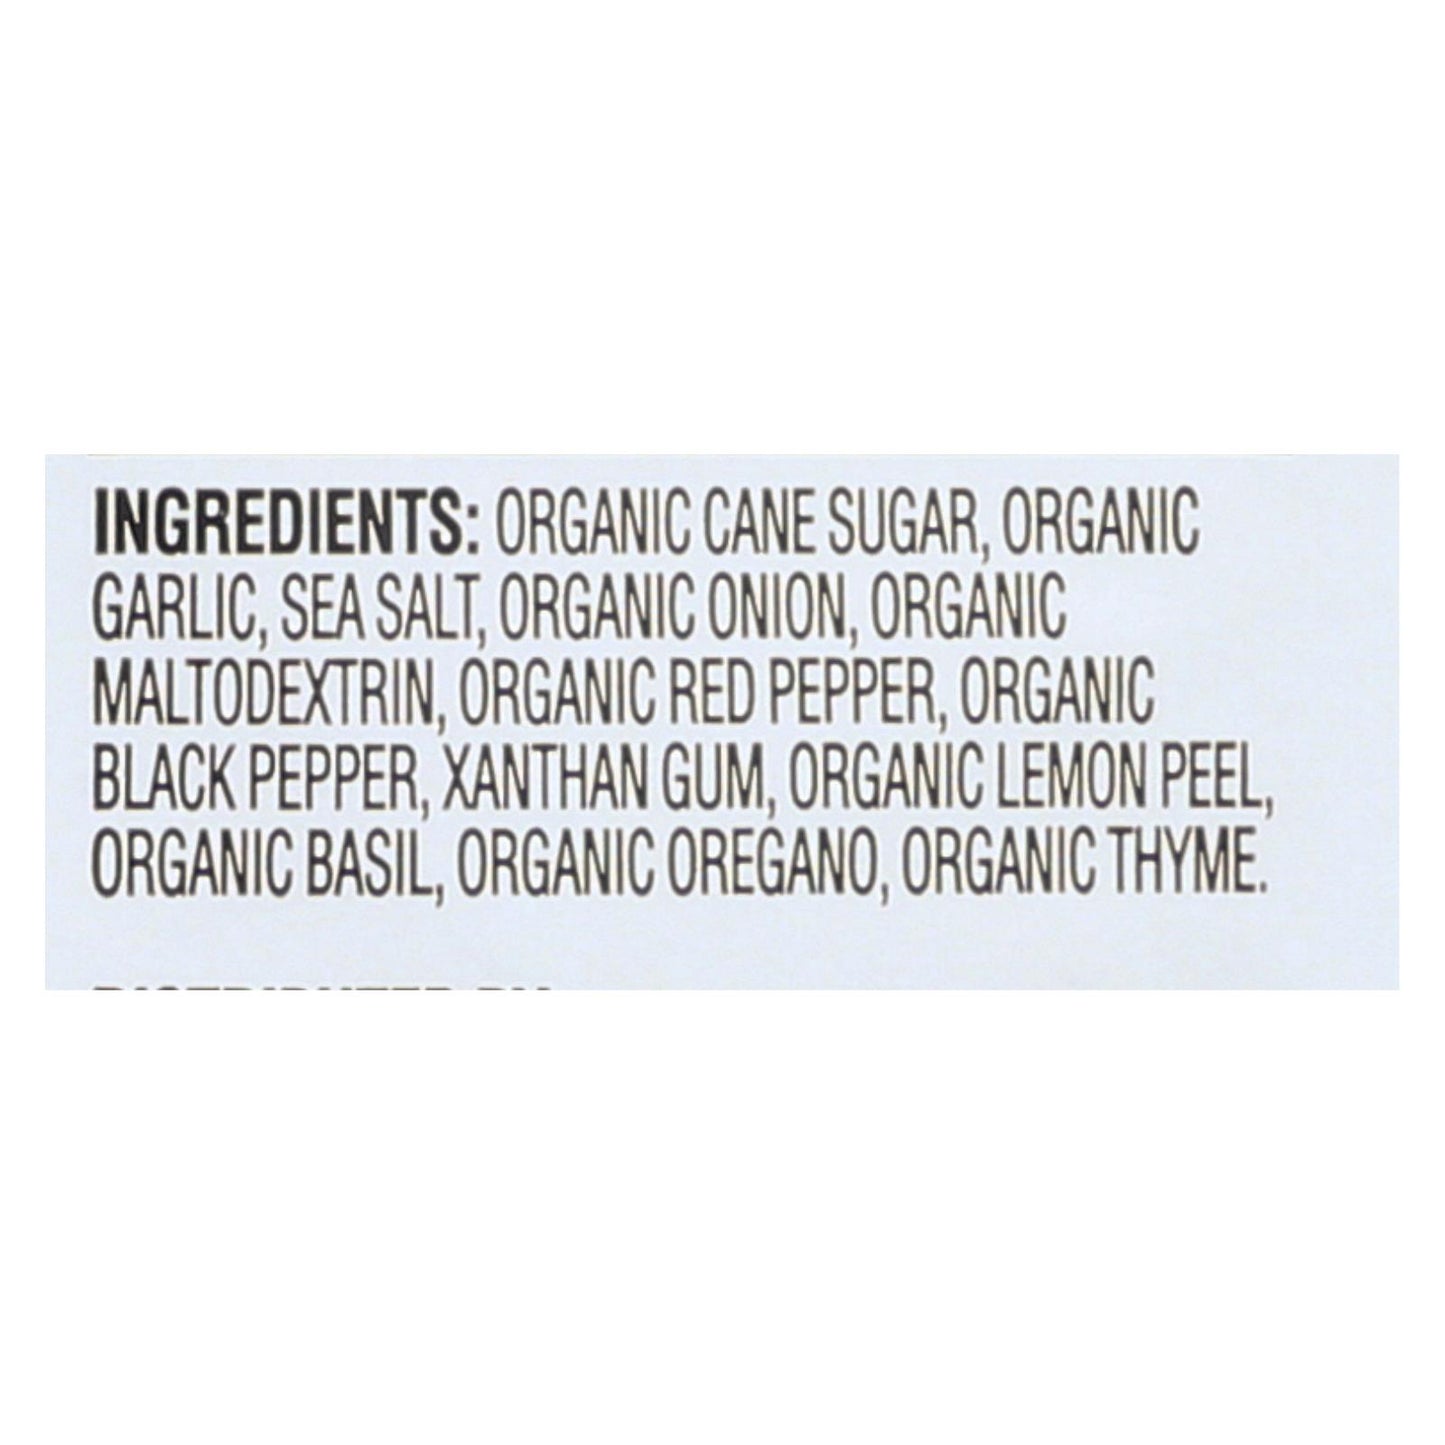 Simply Organic Italian Salad Dressing Mix - Case Of 12 - 0.7 Oz. | OnlyNaturals.us